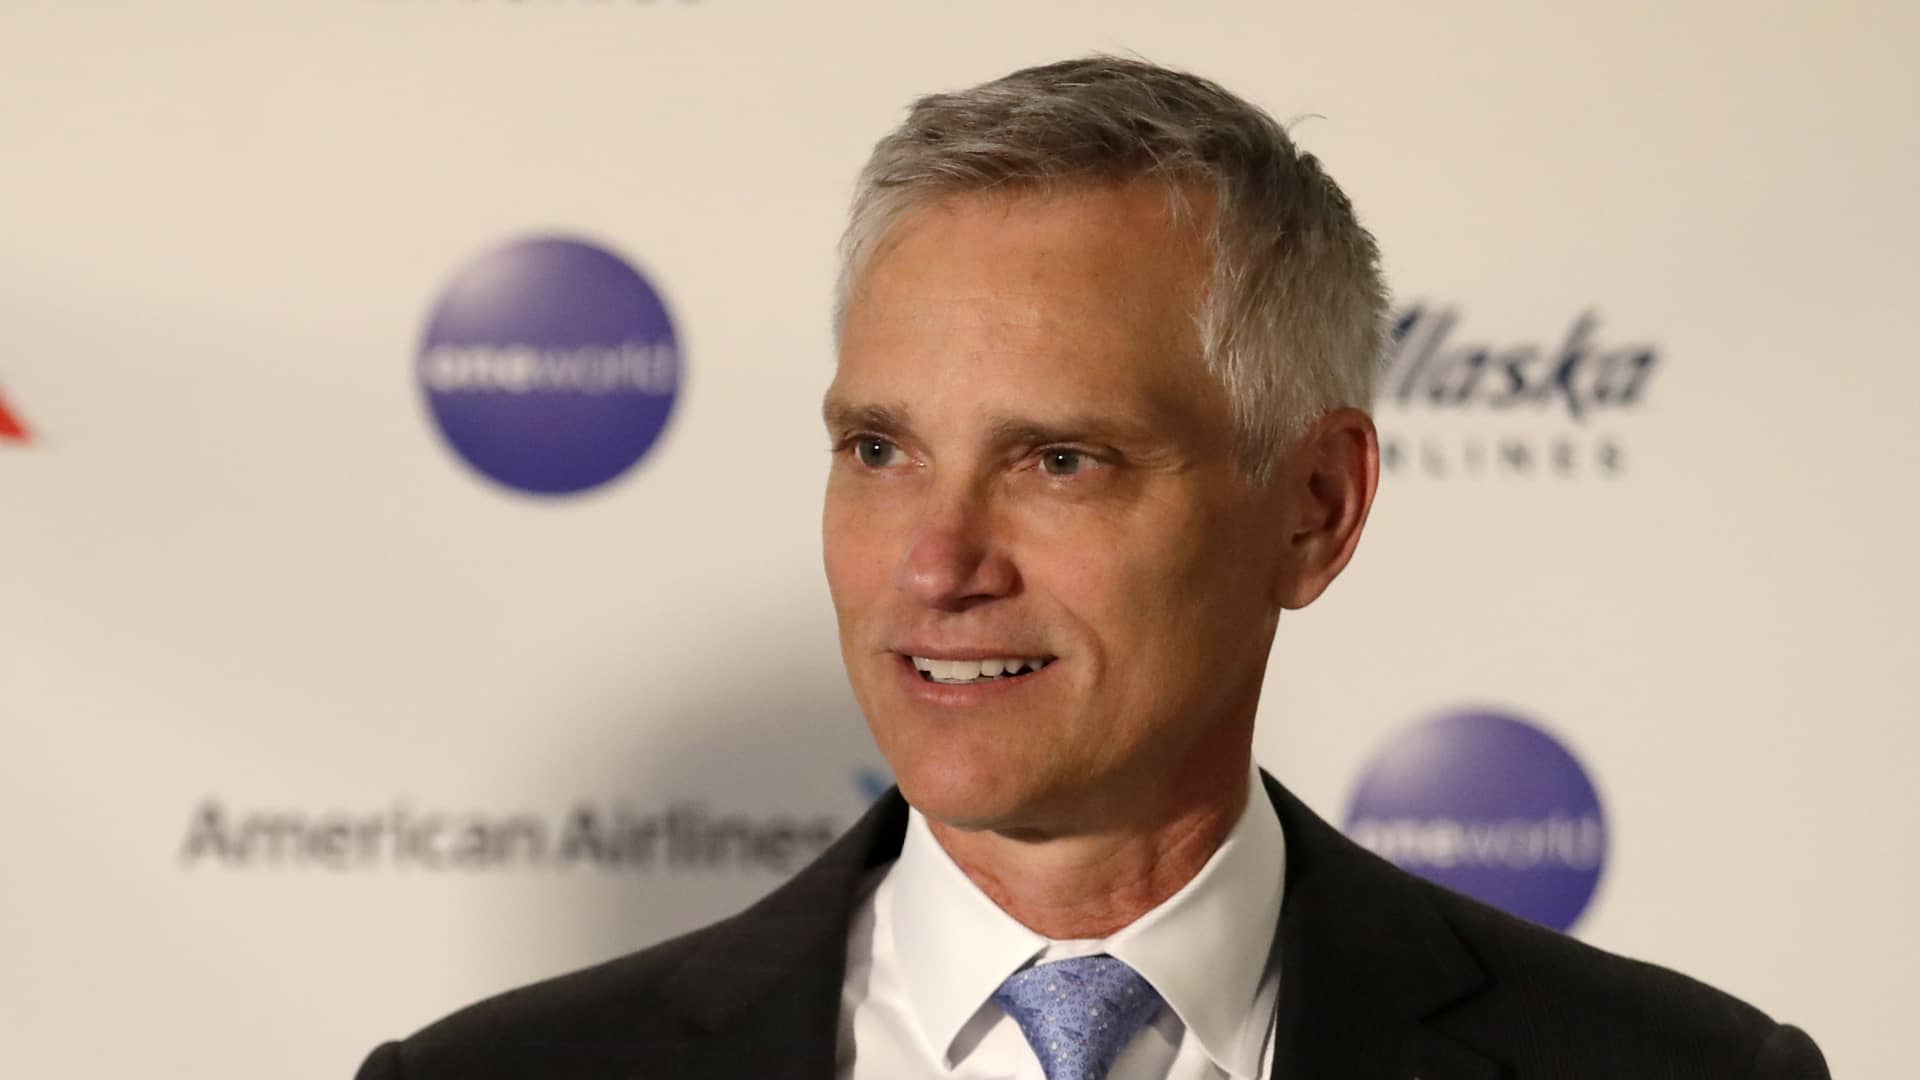 American Airlines CEO vows to improve pilot pay as wages at other carriers rise